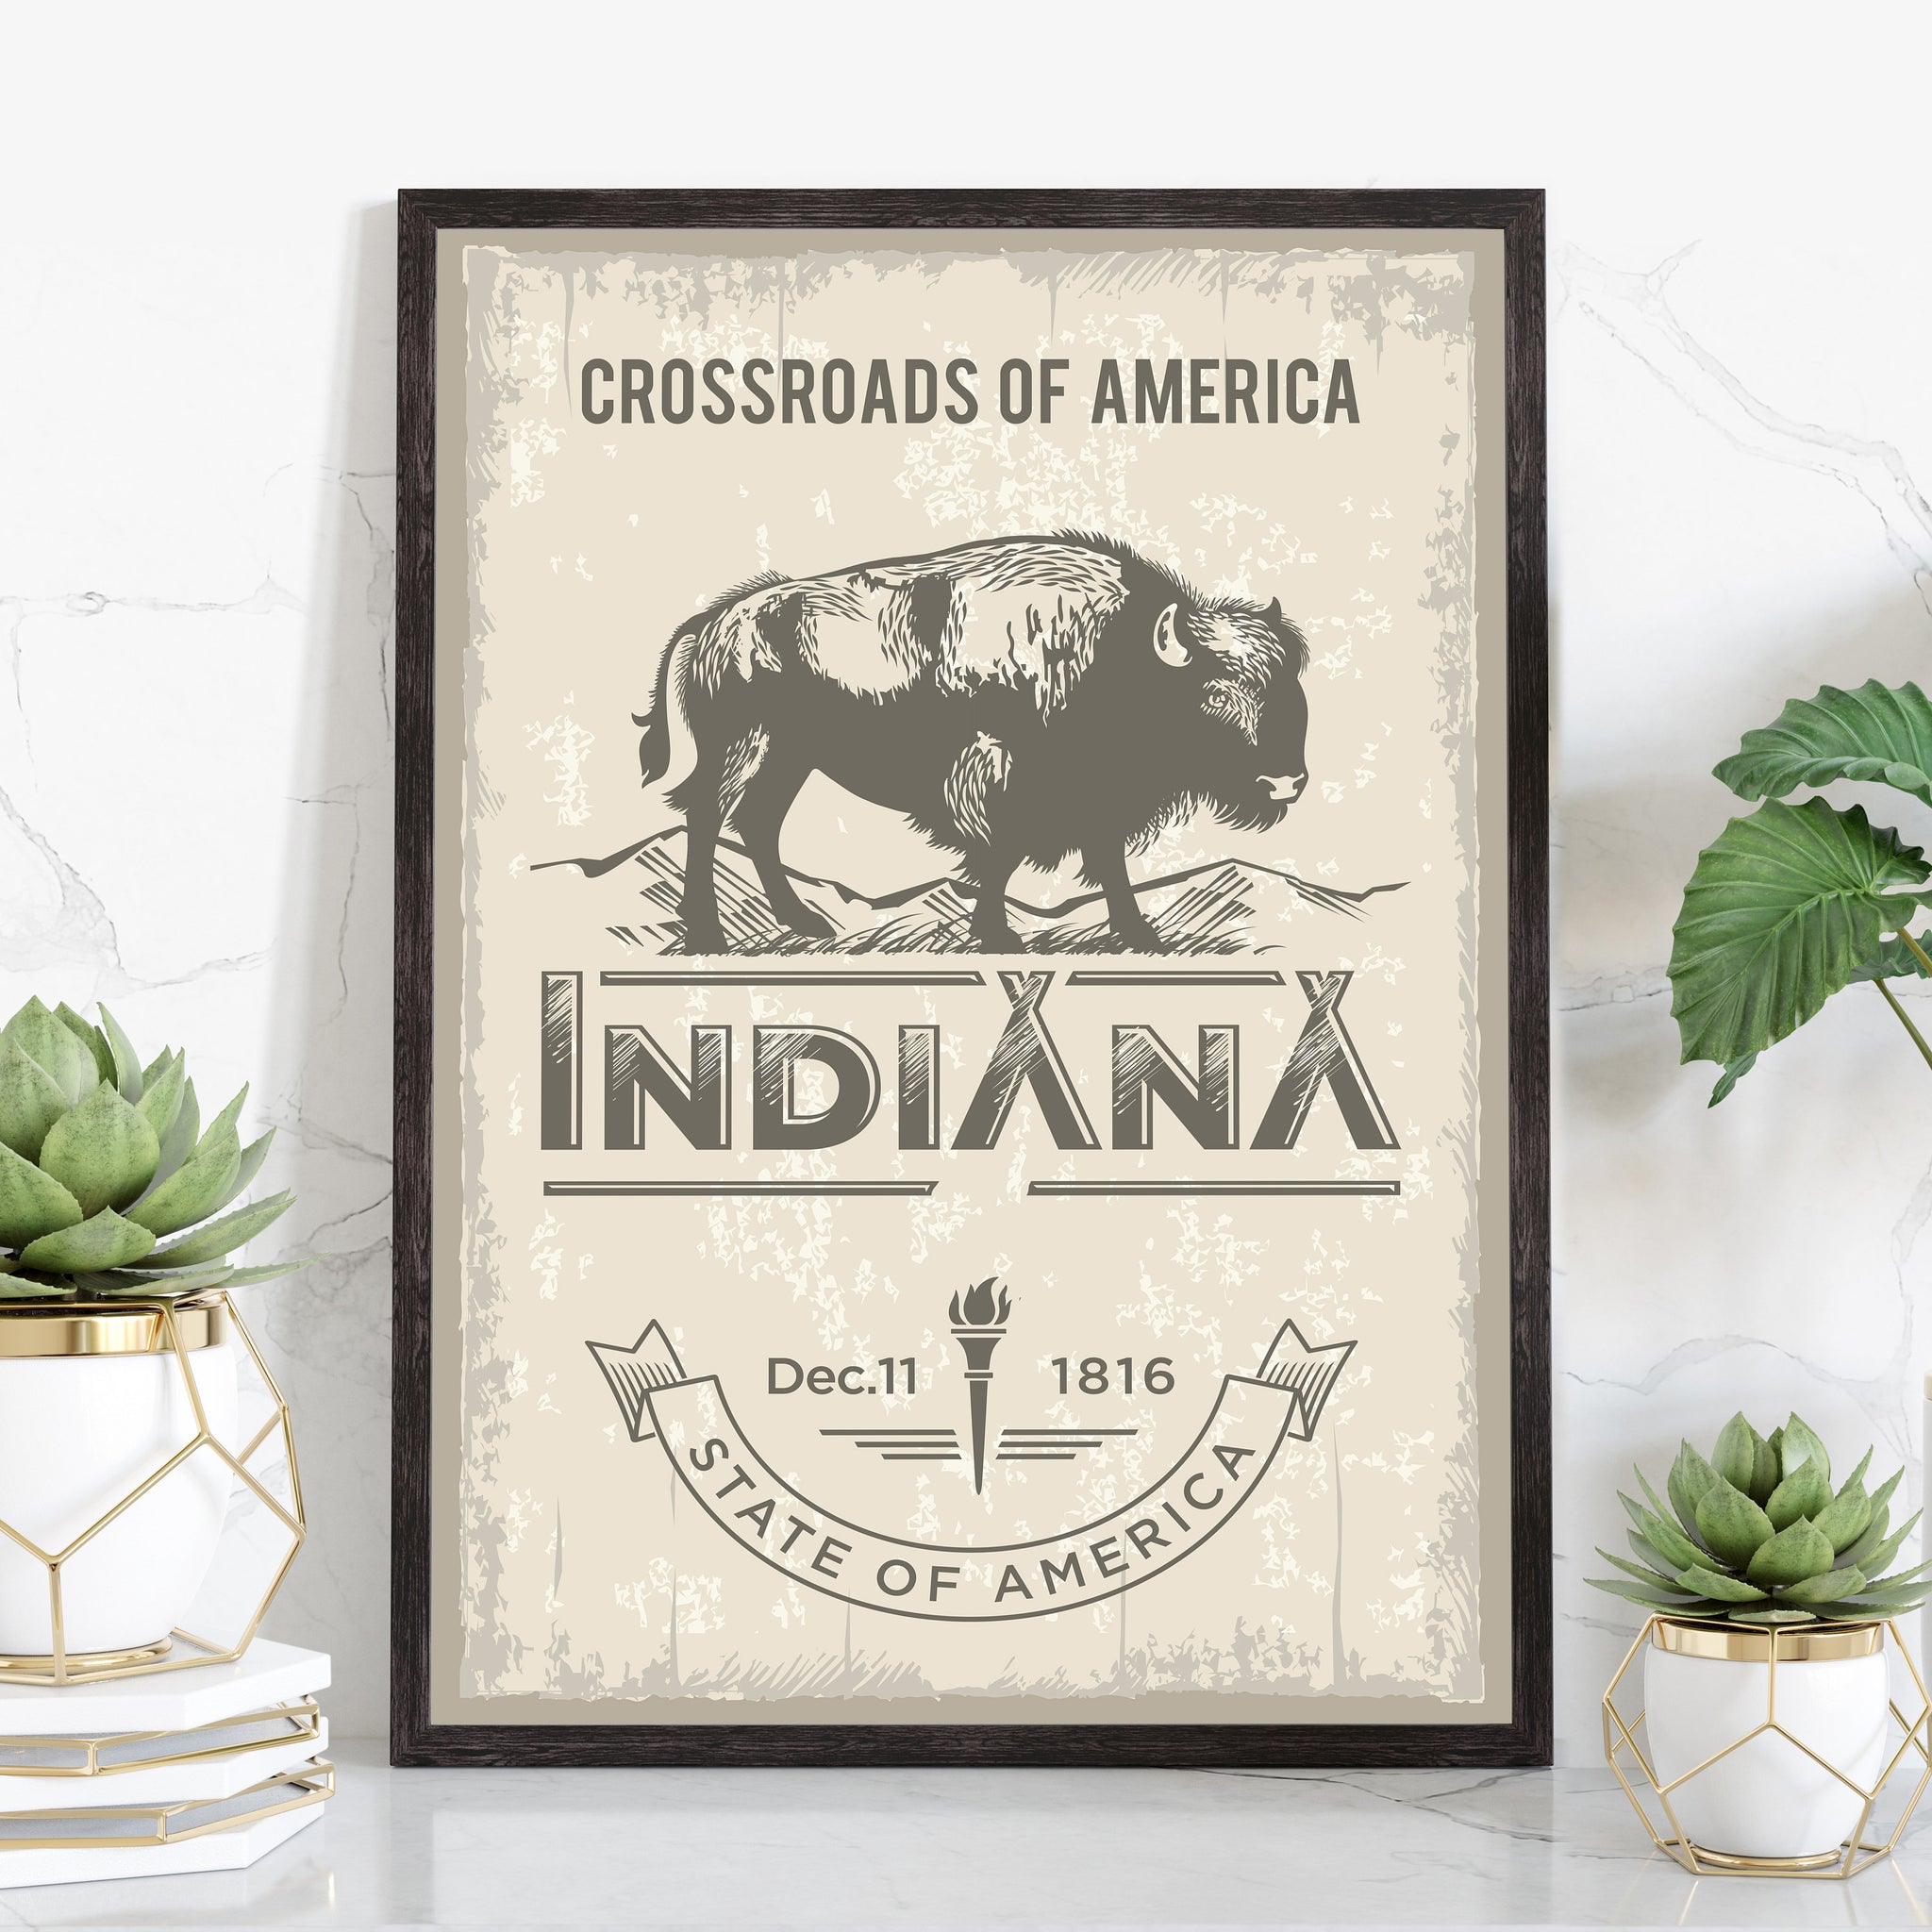 Indiana State Symbol Poster, Indiana State Poster Print, Indiana State Emblem Poster, Retro Travel State Poster, Home and Office Wall Art